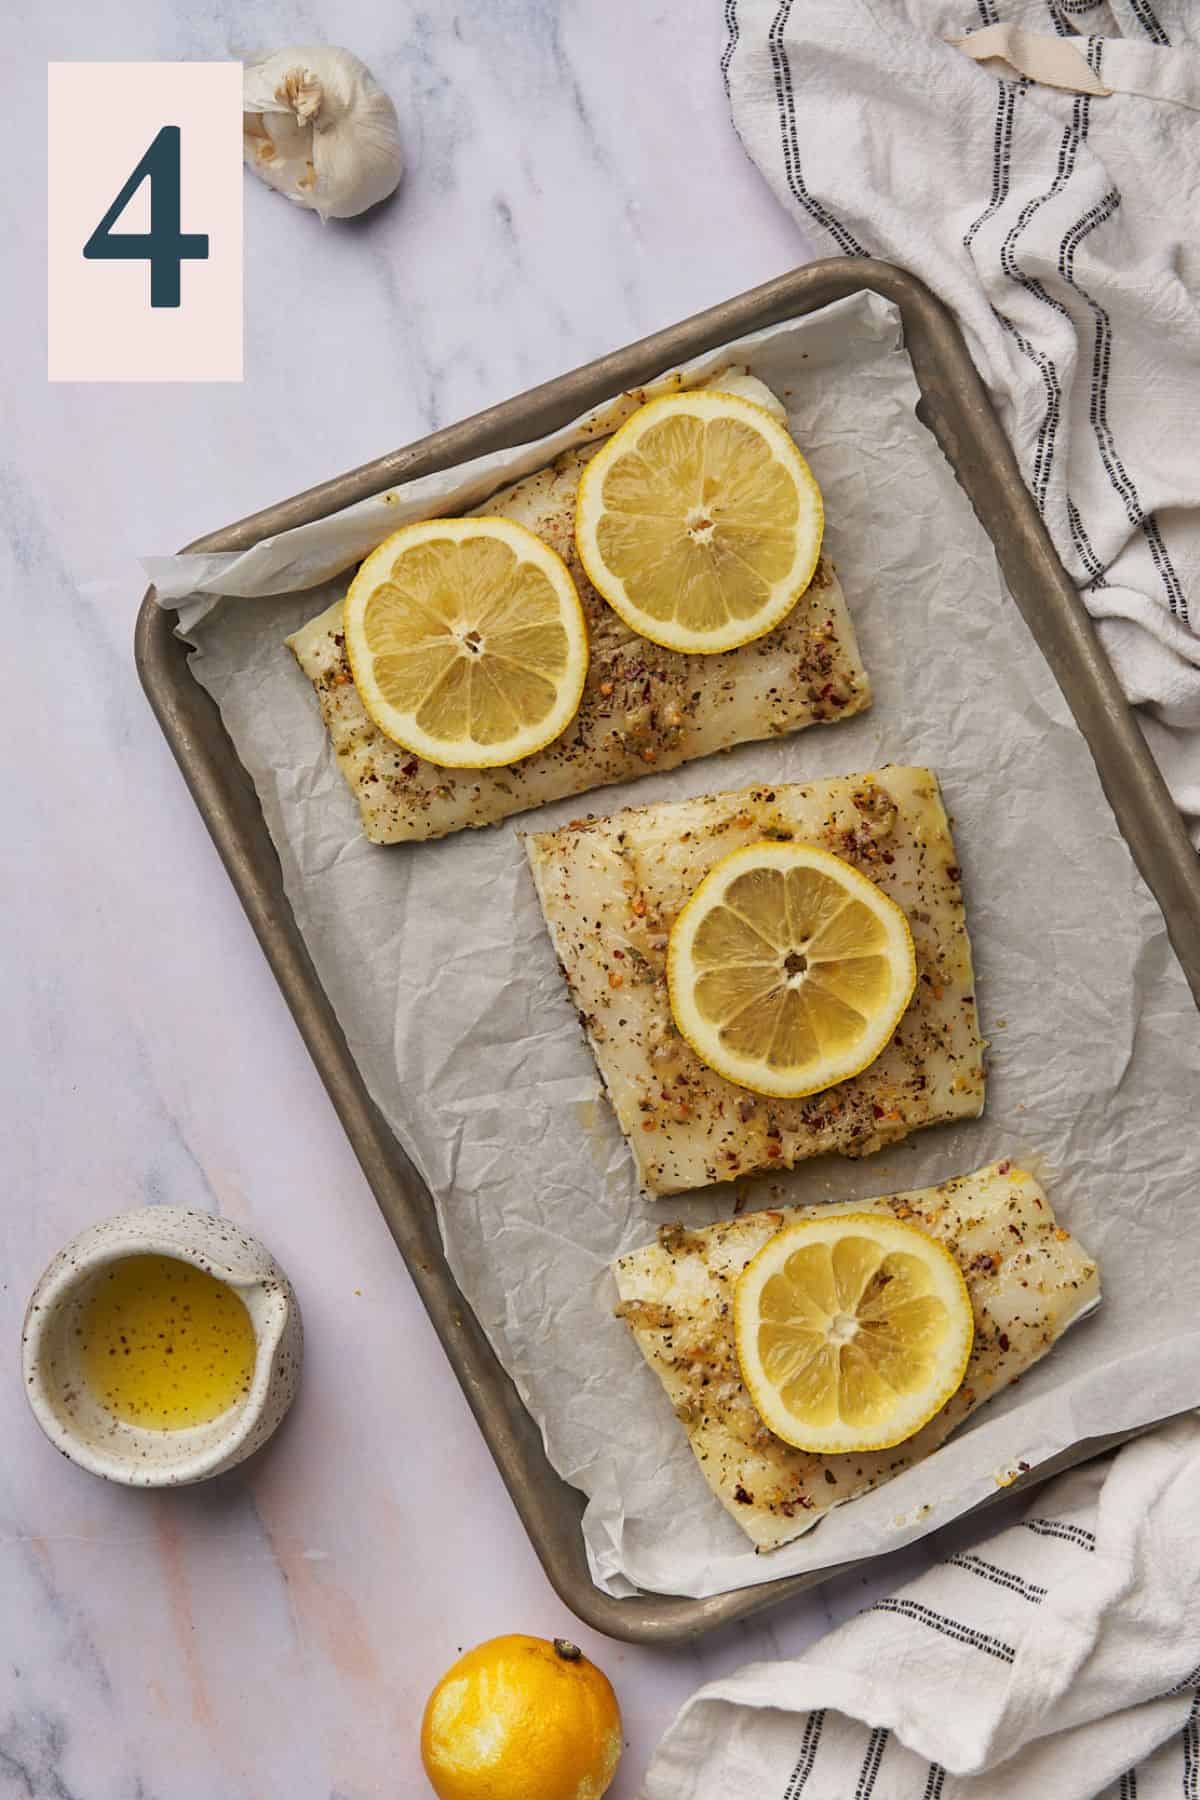 chilean sea bass fillets seasoned and topped with lemon slices on a baking sheet lined with parchment paper. 